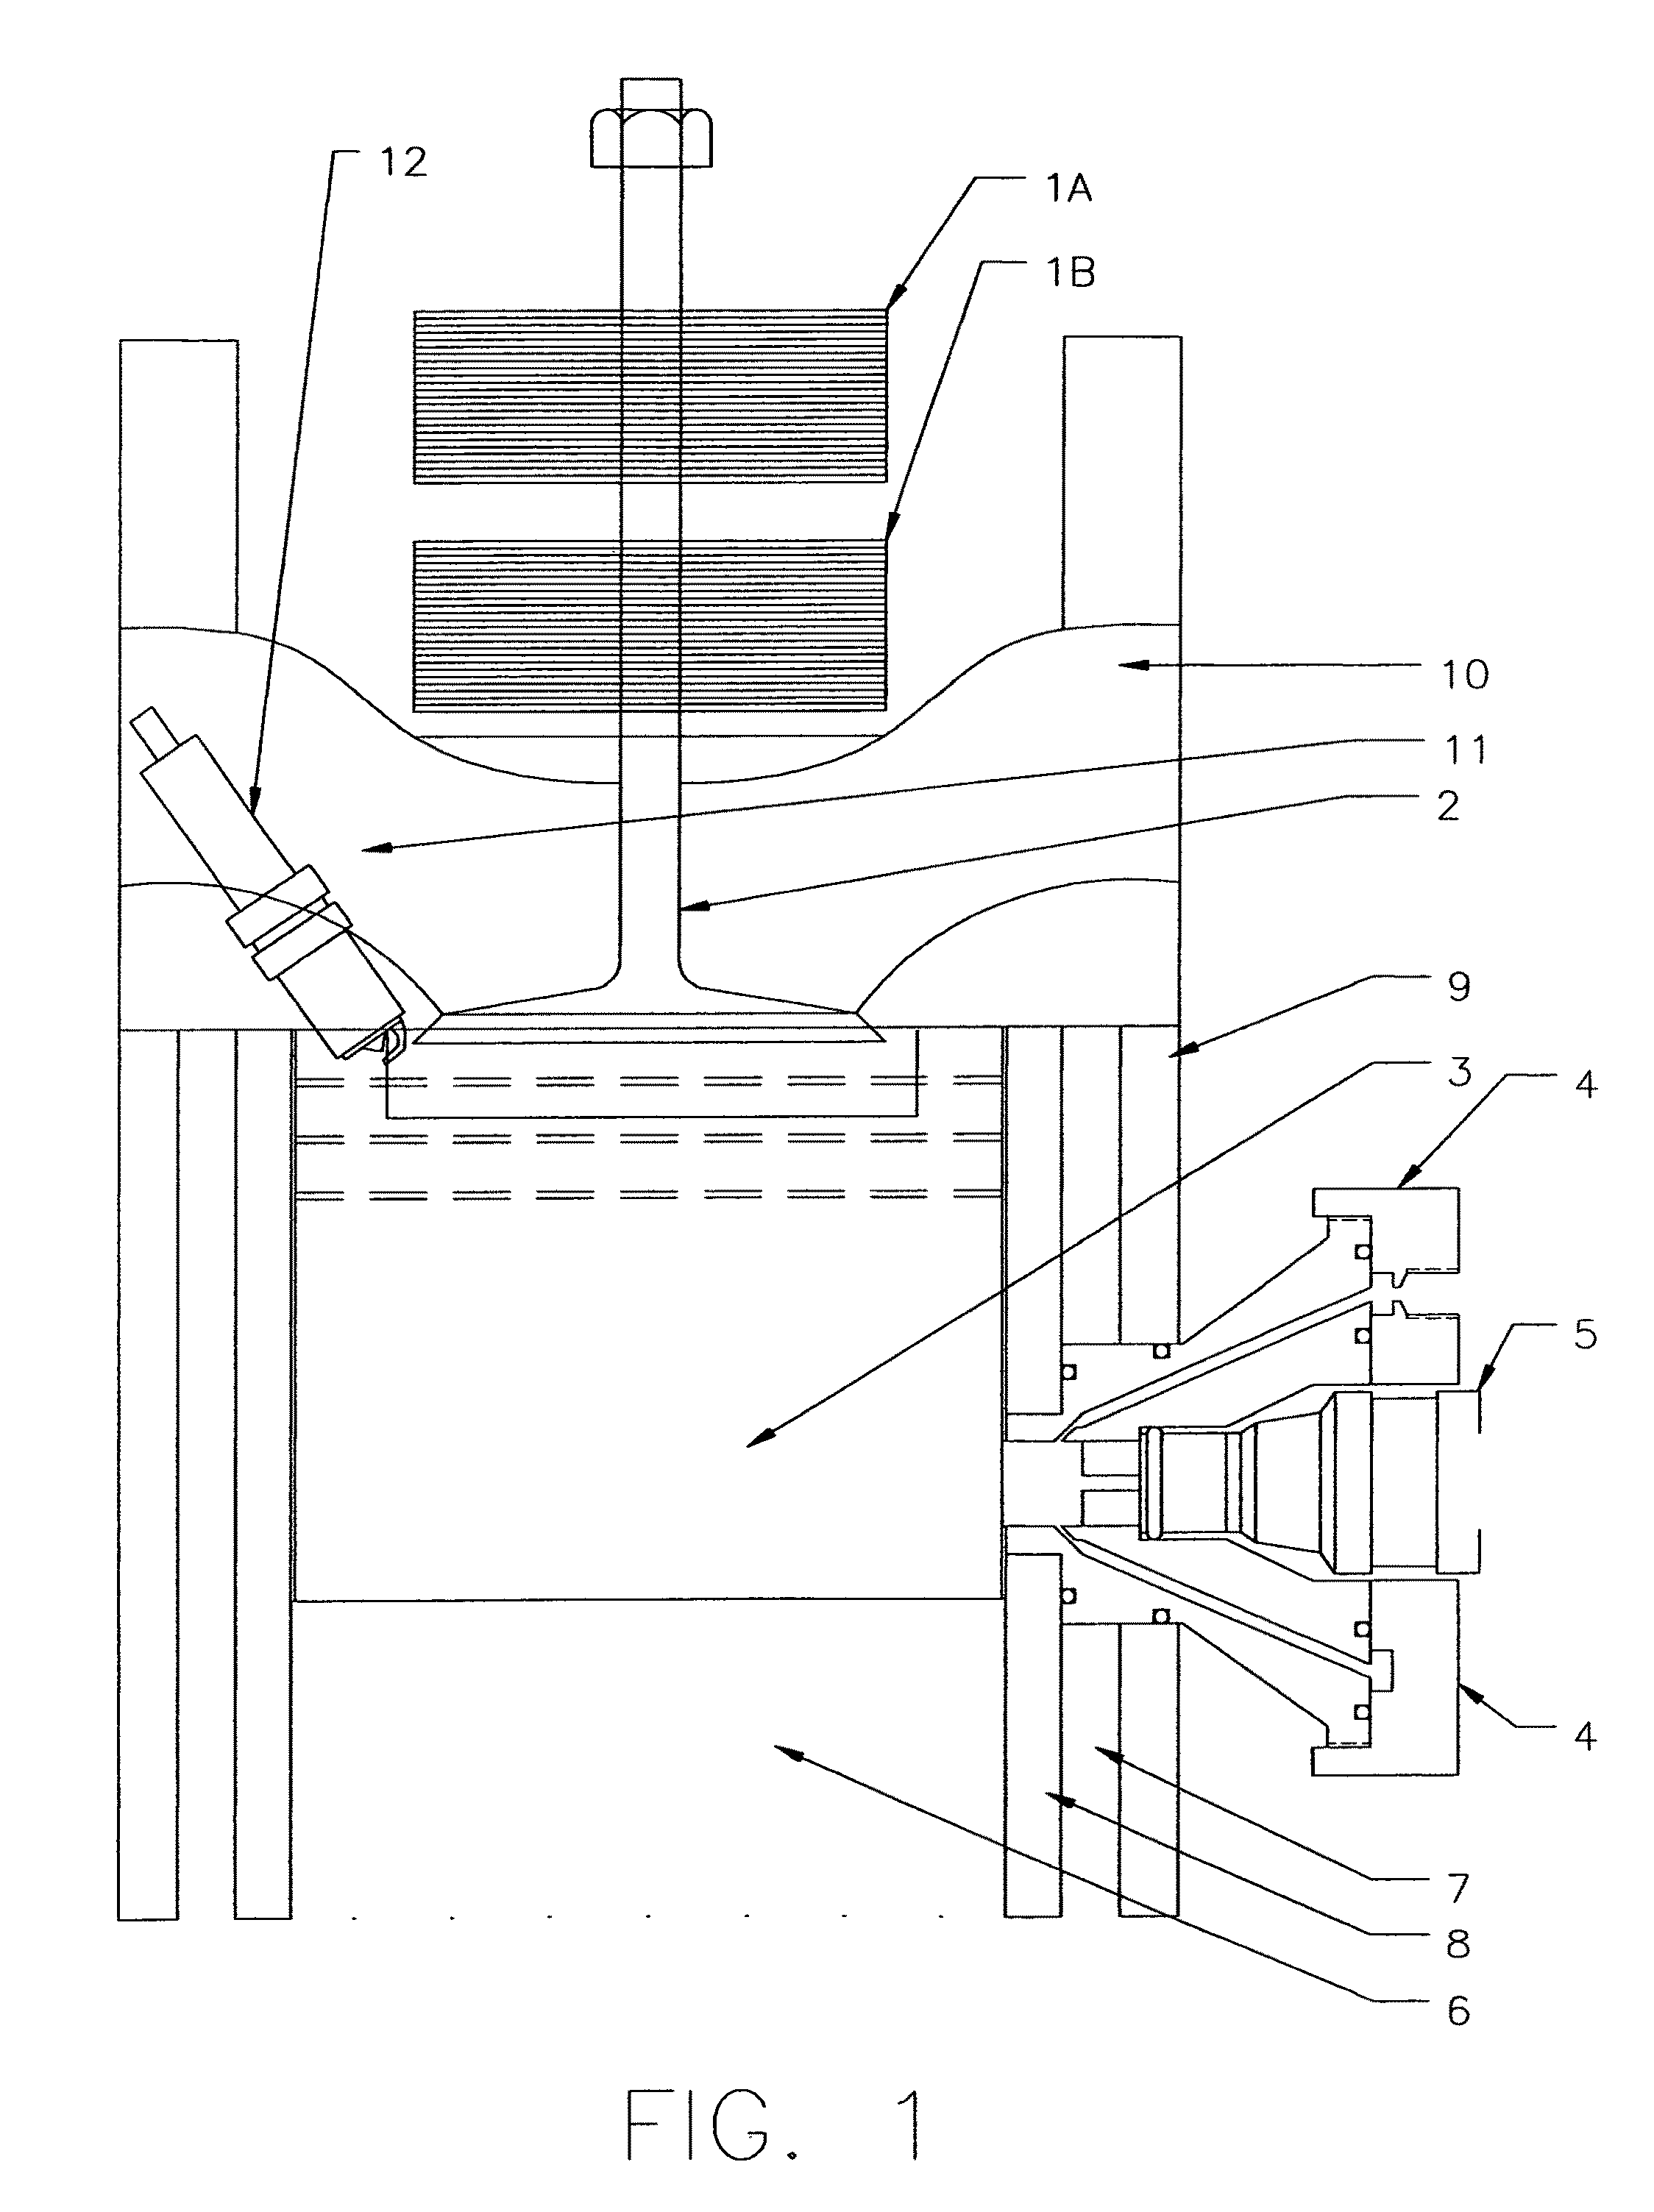 Internal combustion engine having an electric solenoid poppet valve and air/fuel injector